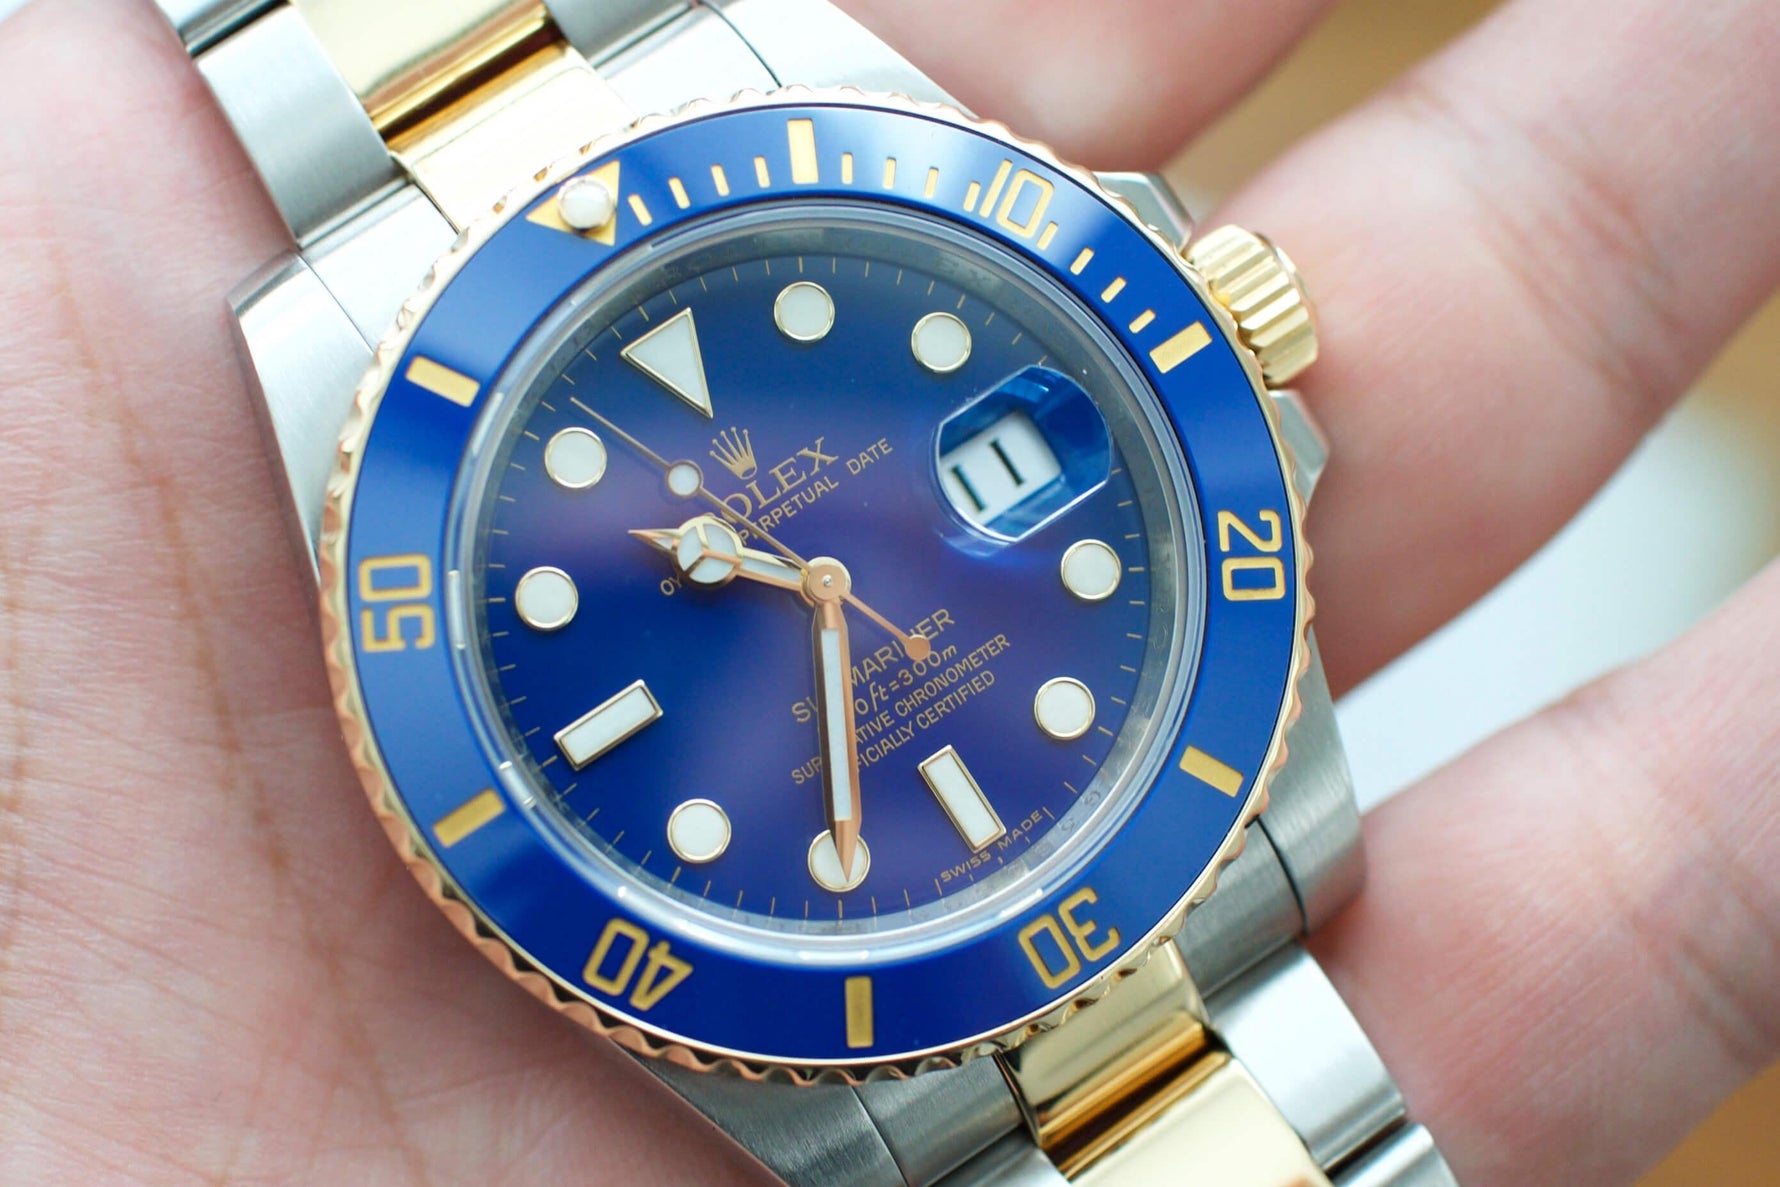 SOLD OUT: Rolex Two-Tone Submariner M116613LB - Serviced by Rolex January 2021 - WearingTime Luxury Watches